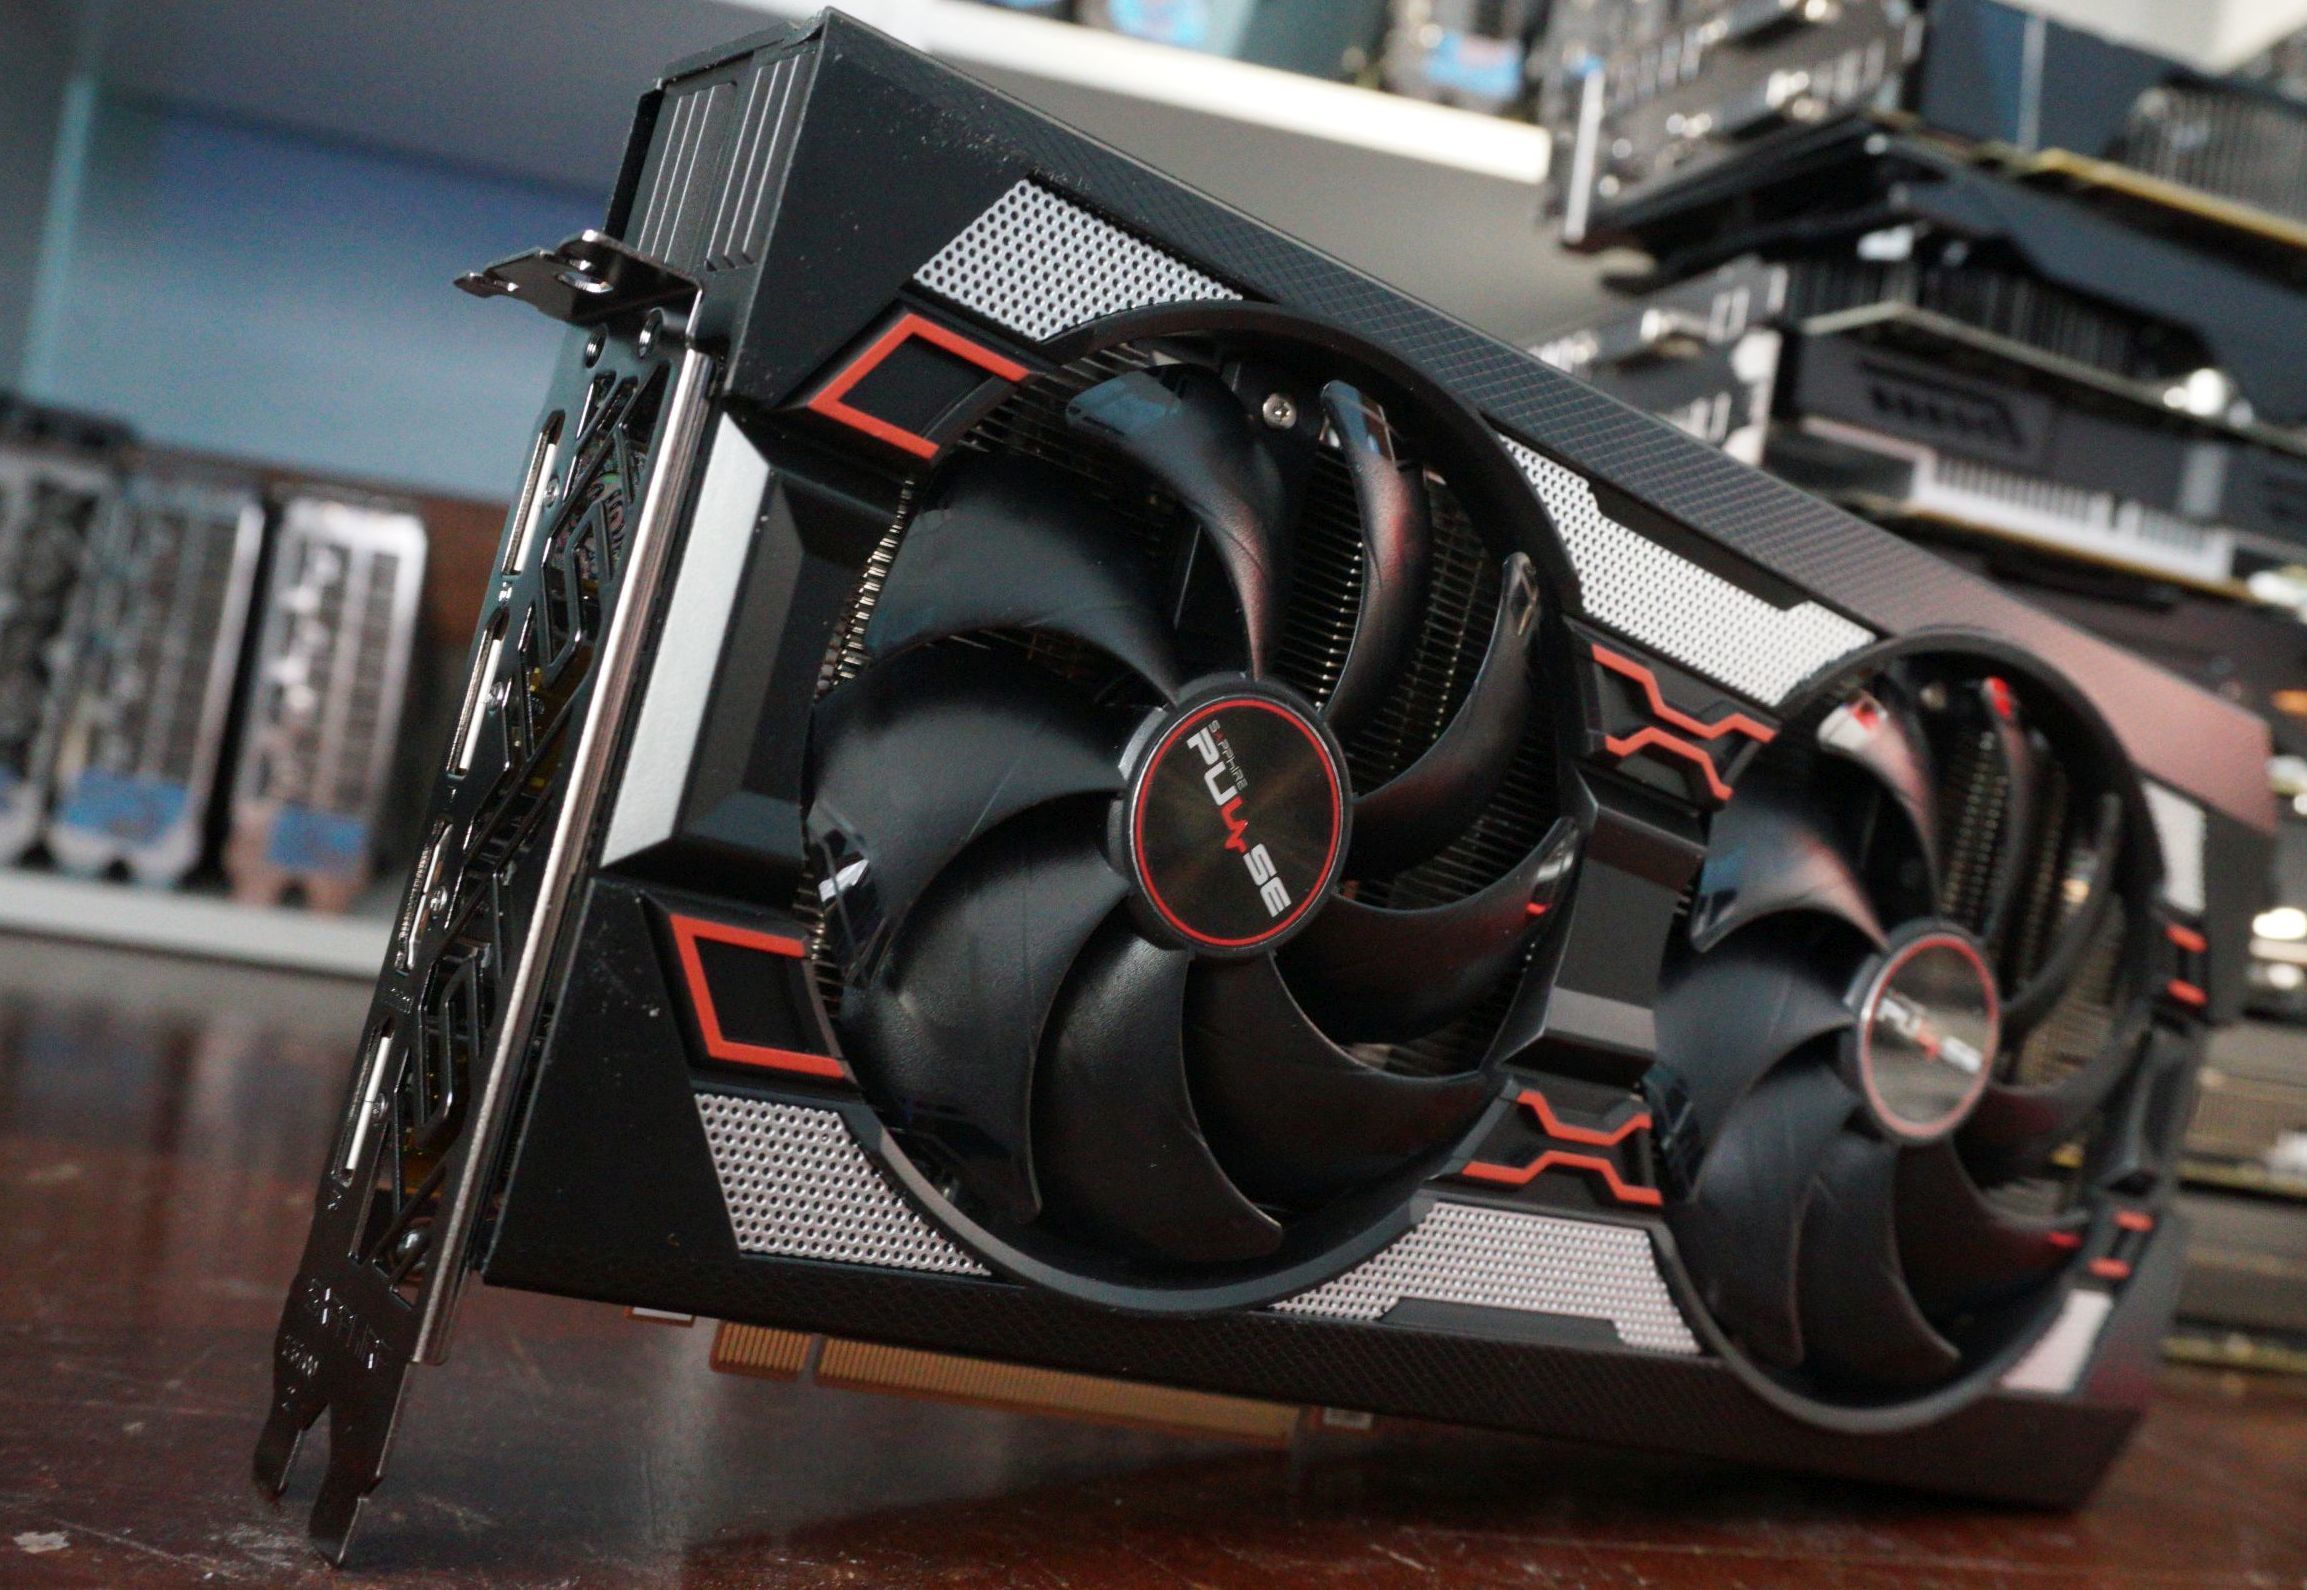 Shop carefully: Some Radeon RX 5600 XT graphics cards are much faster